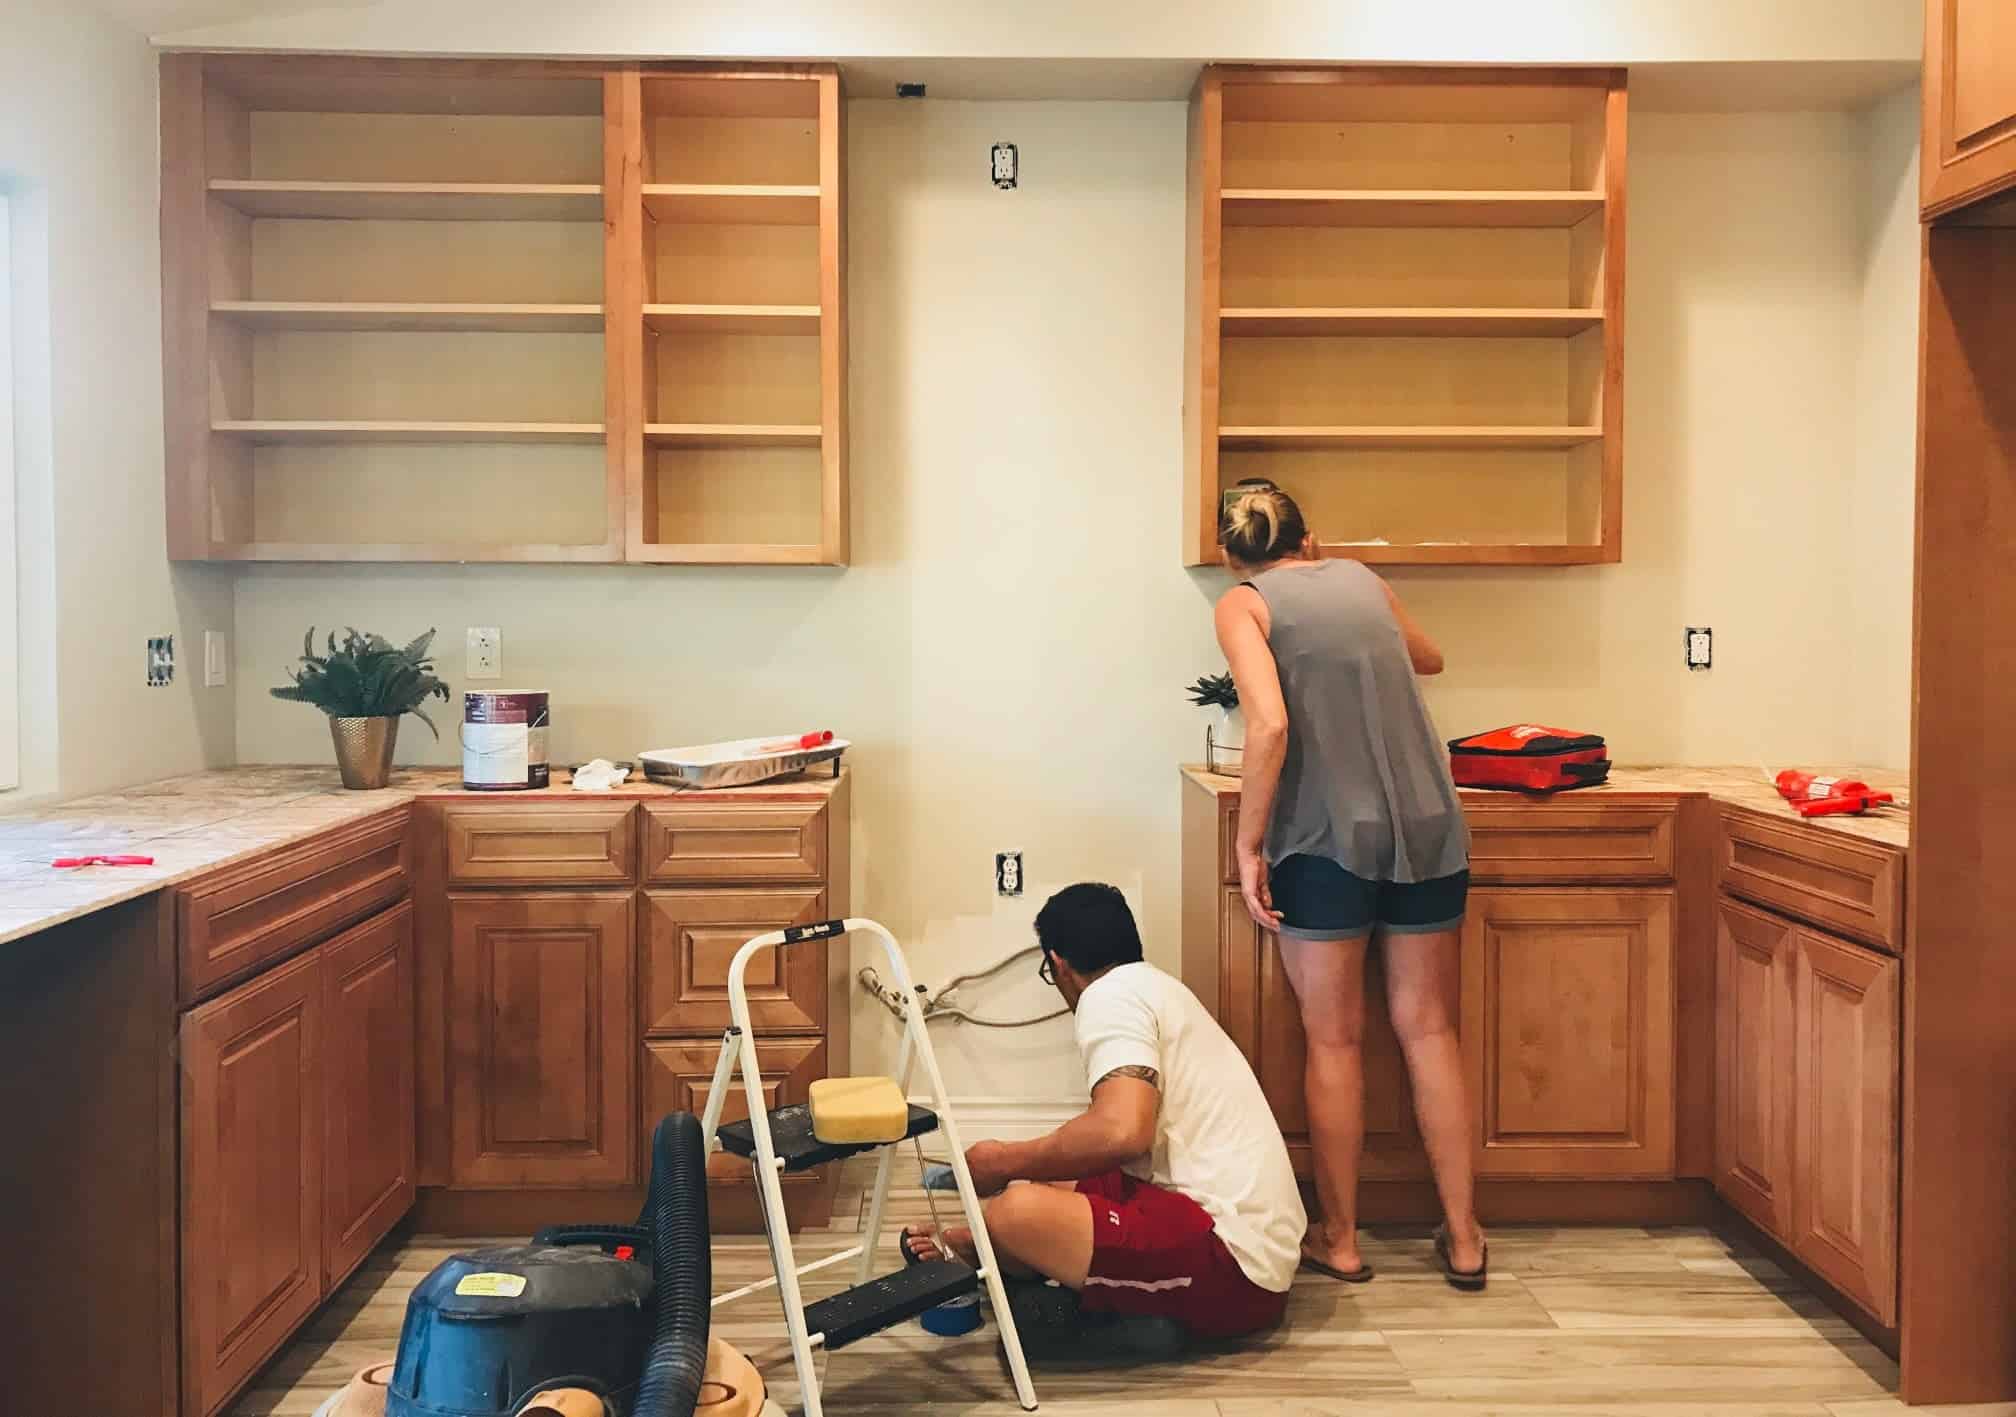 DIY couple getting ready to paint kitchen furniture